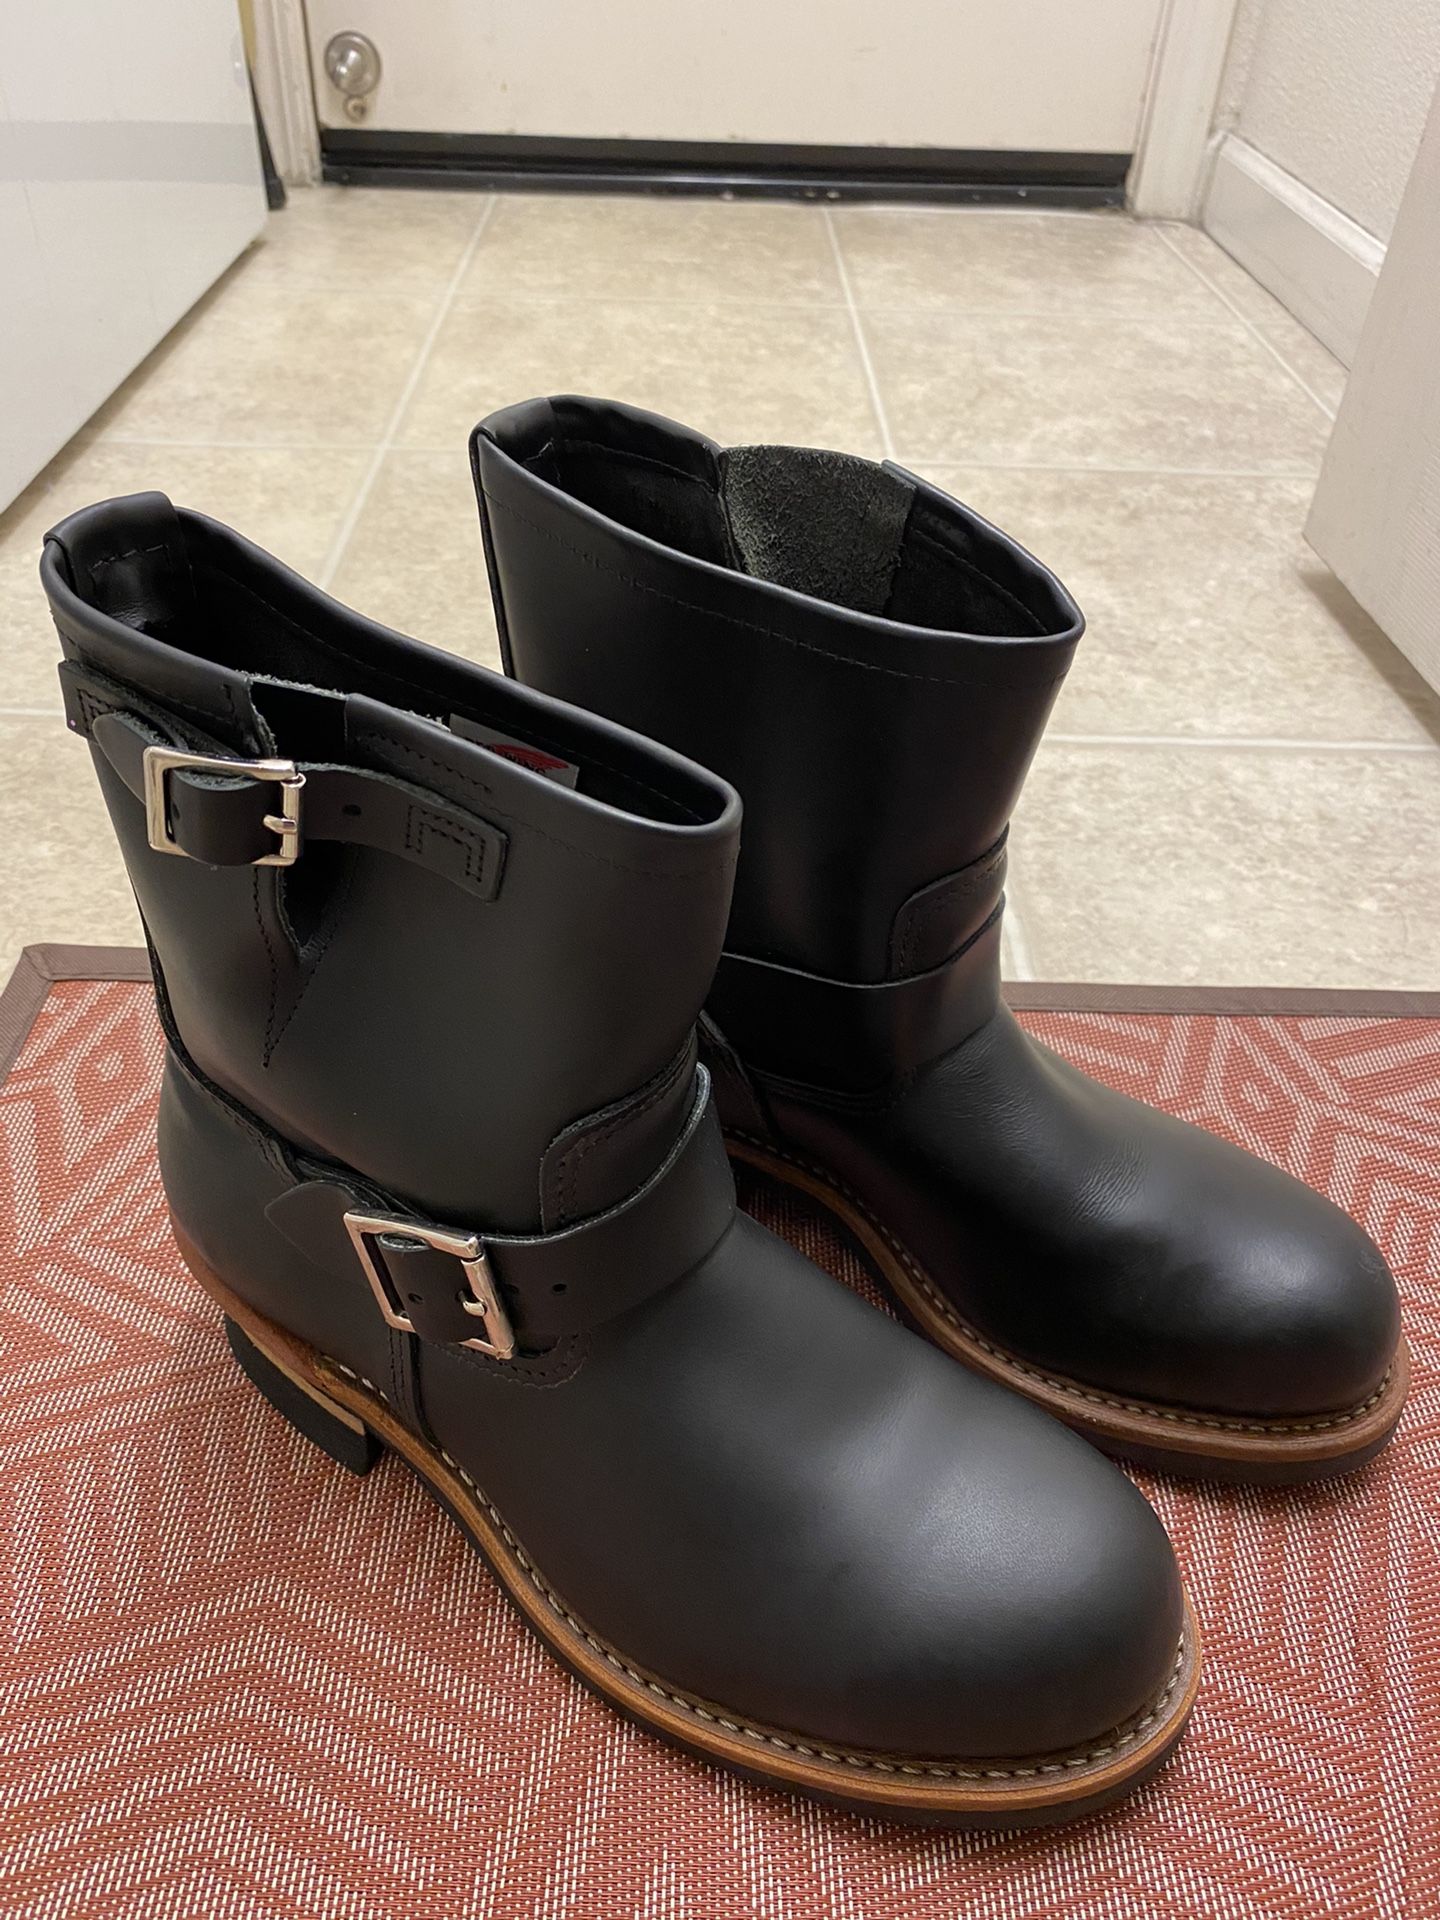 Red Wing Engineer Short Black Boot 2976 Size 8 D  Was a store display from Nordstrom... Shows light wear and the other boot has a small ding on the fr